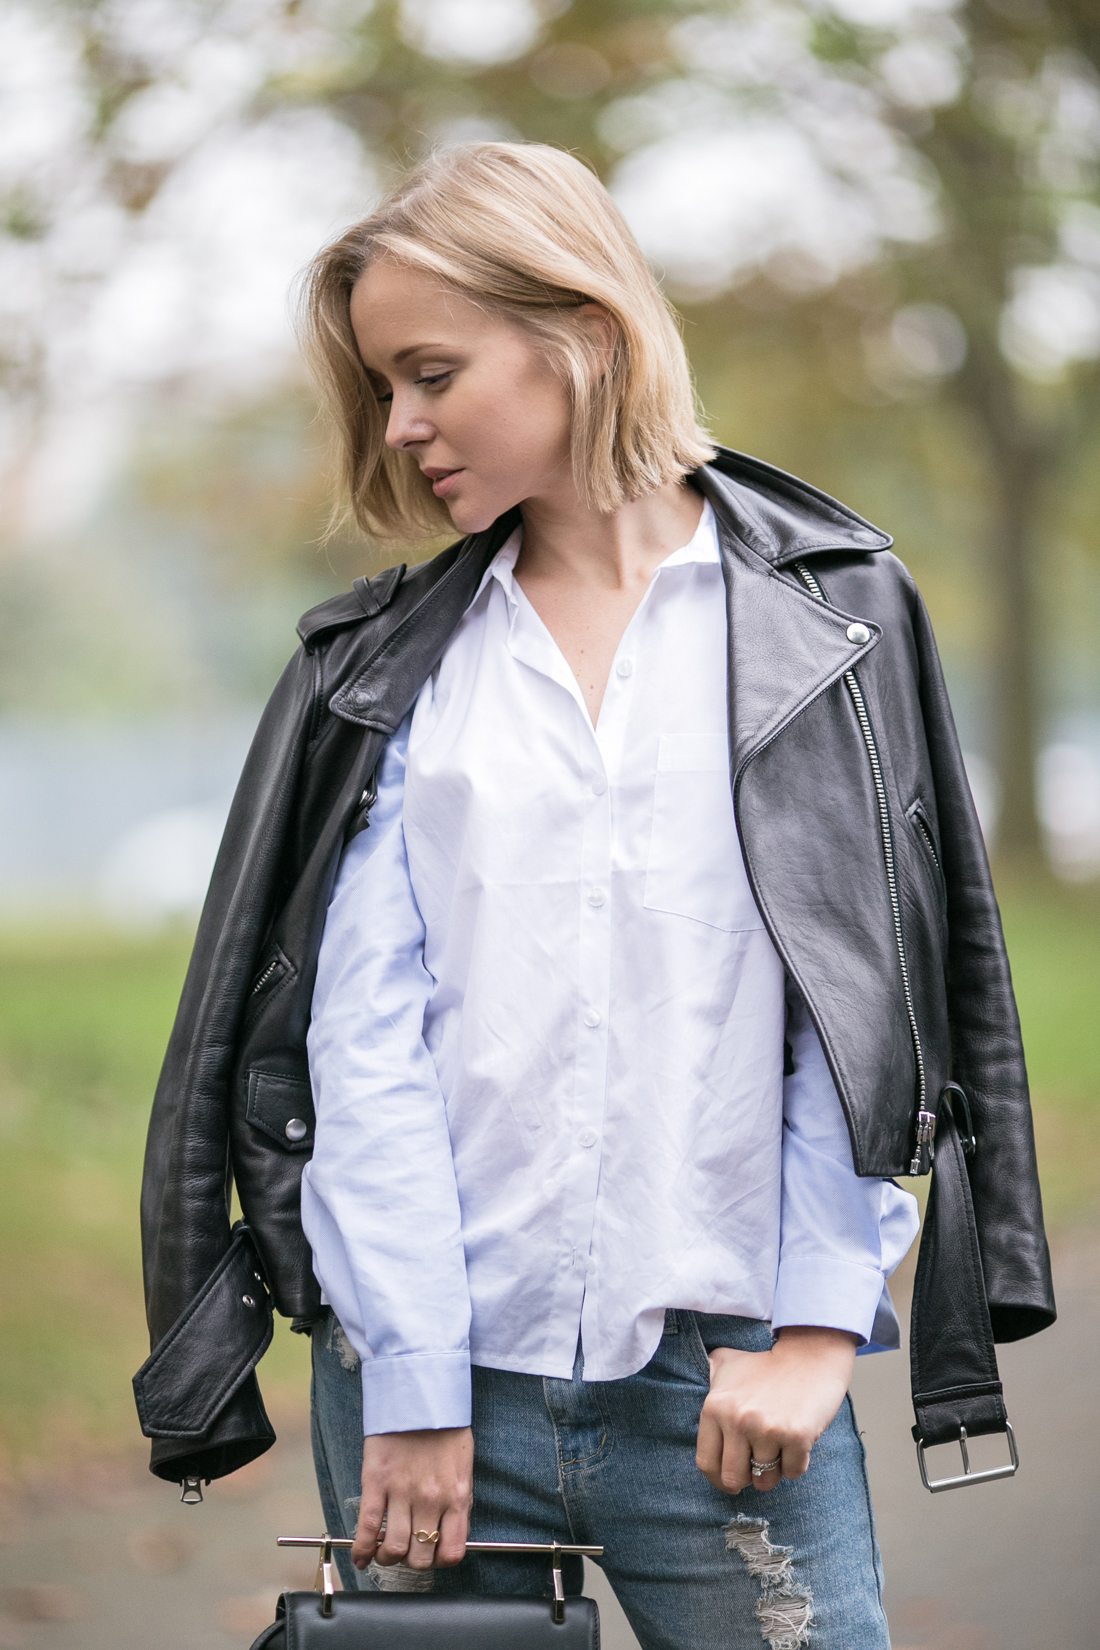 darya kamalova thecablook russian fashion lifestyle blogger in italy outfit spring acne mape leather jacket with boyfriend ripped jeans mules ans m2malletier black bag-6